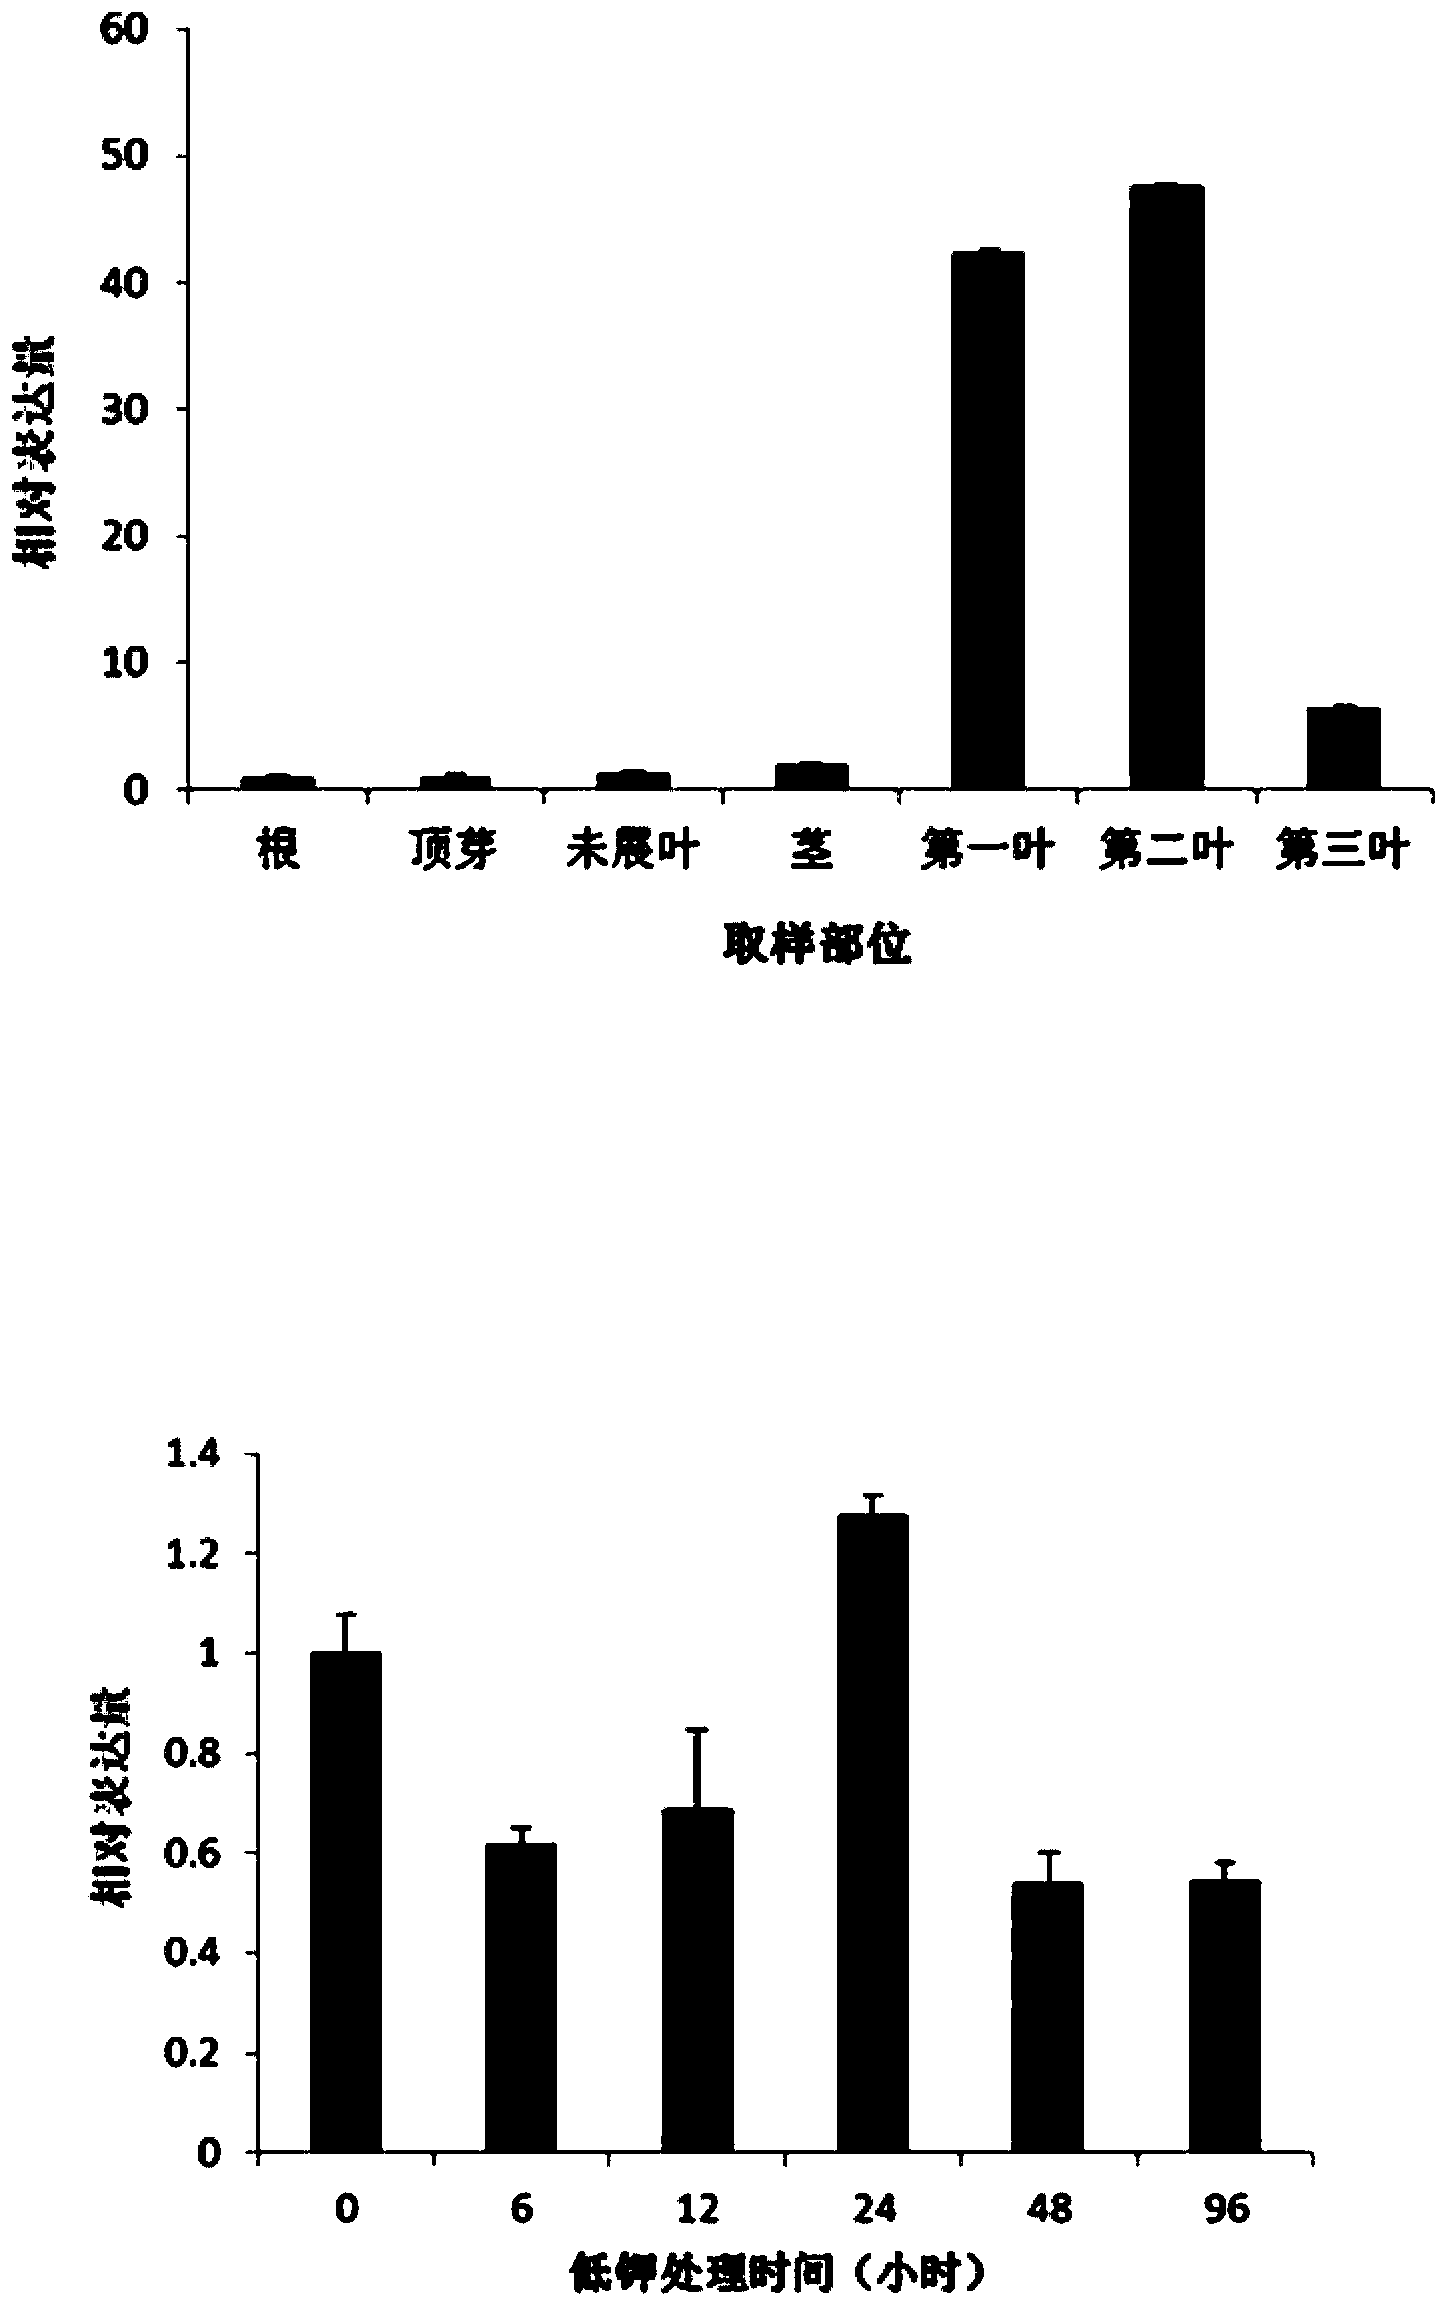 Protein related to plant potassium ion absorption capacity, and coding gent and application thereof